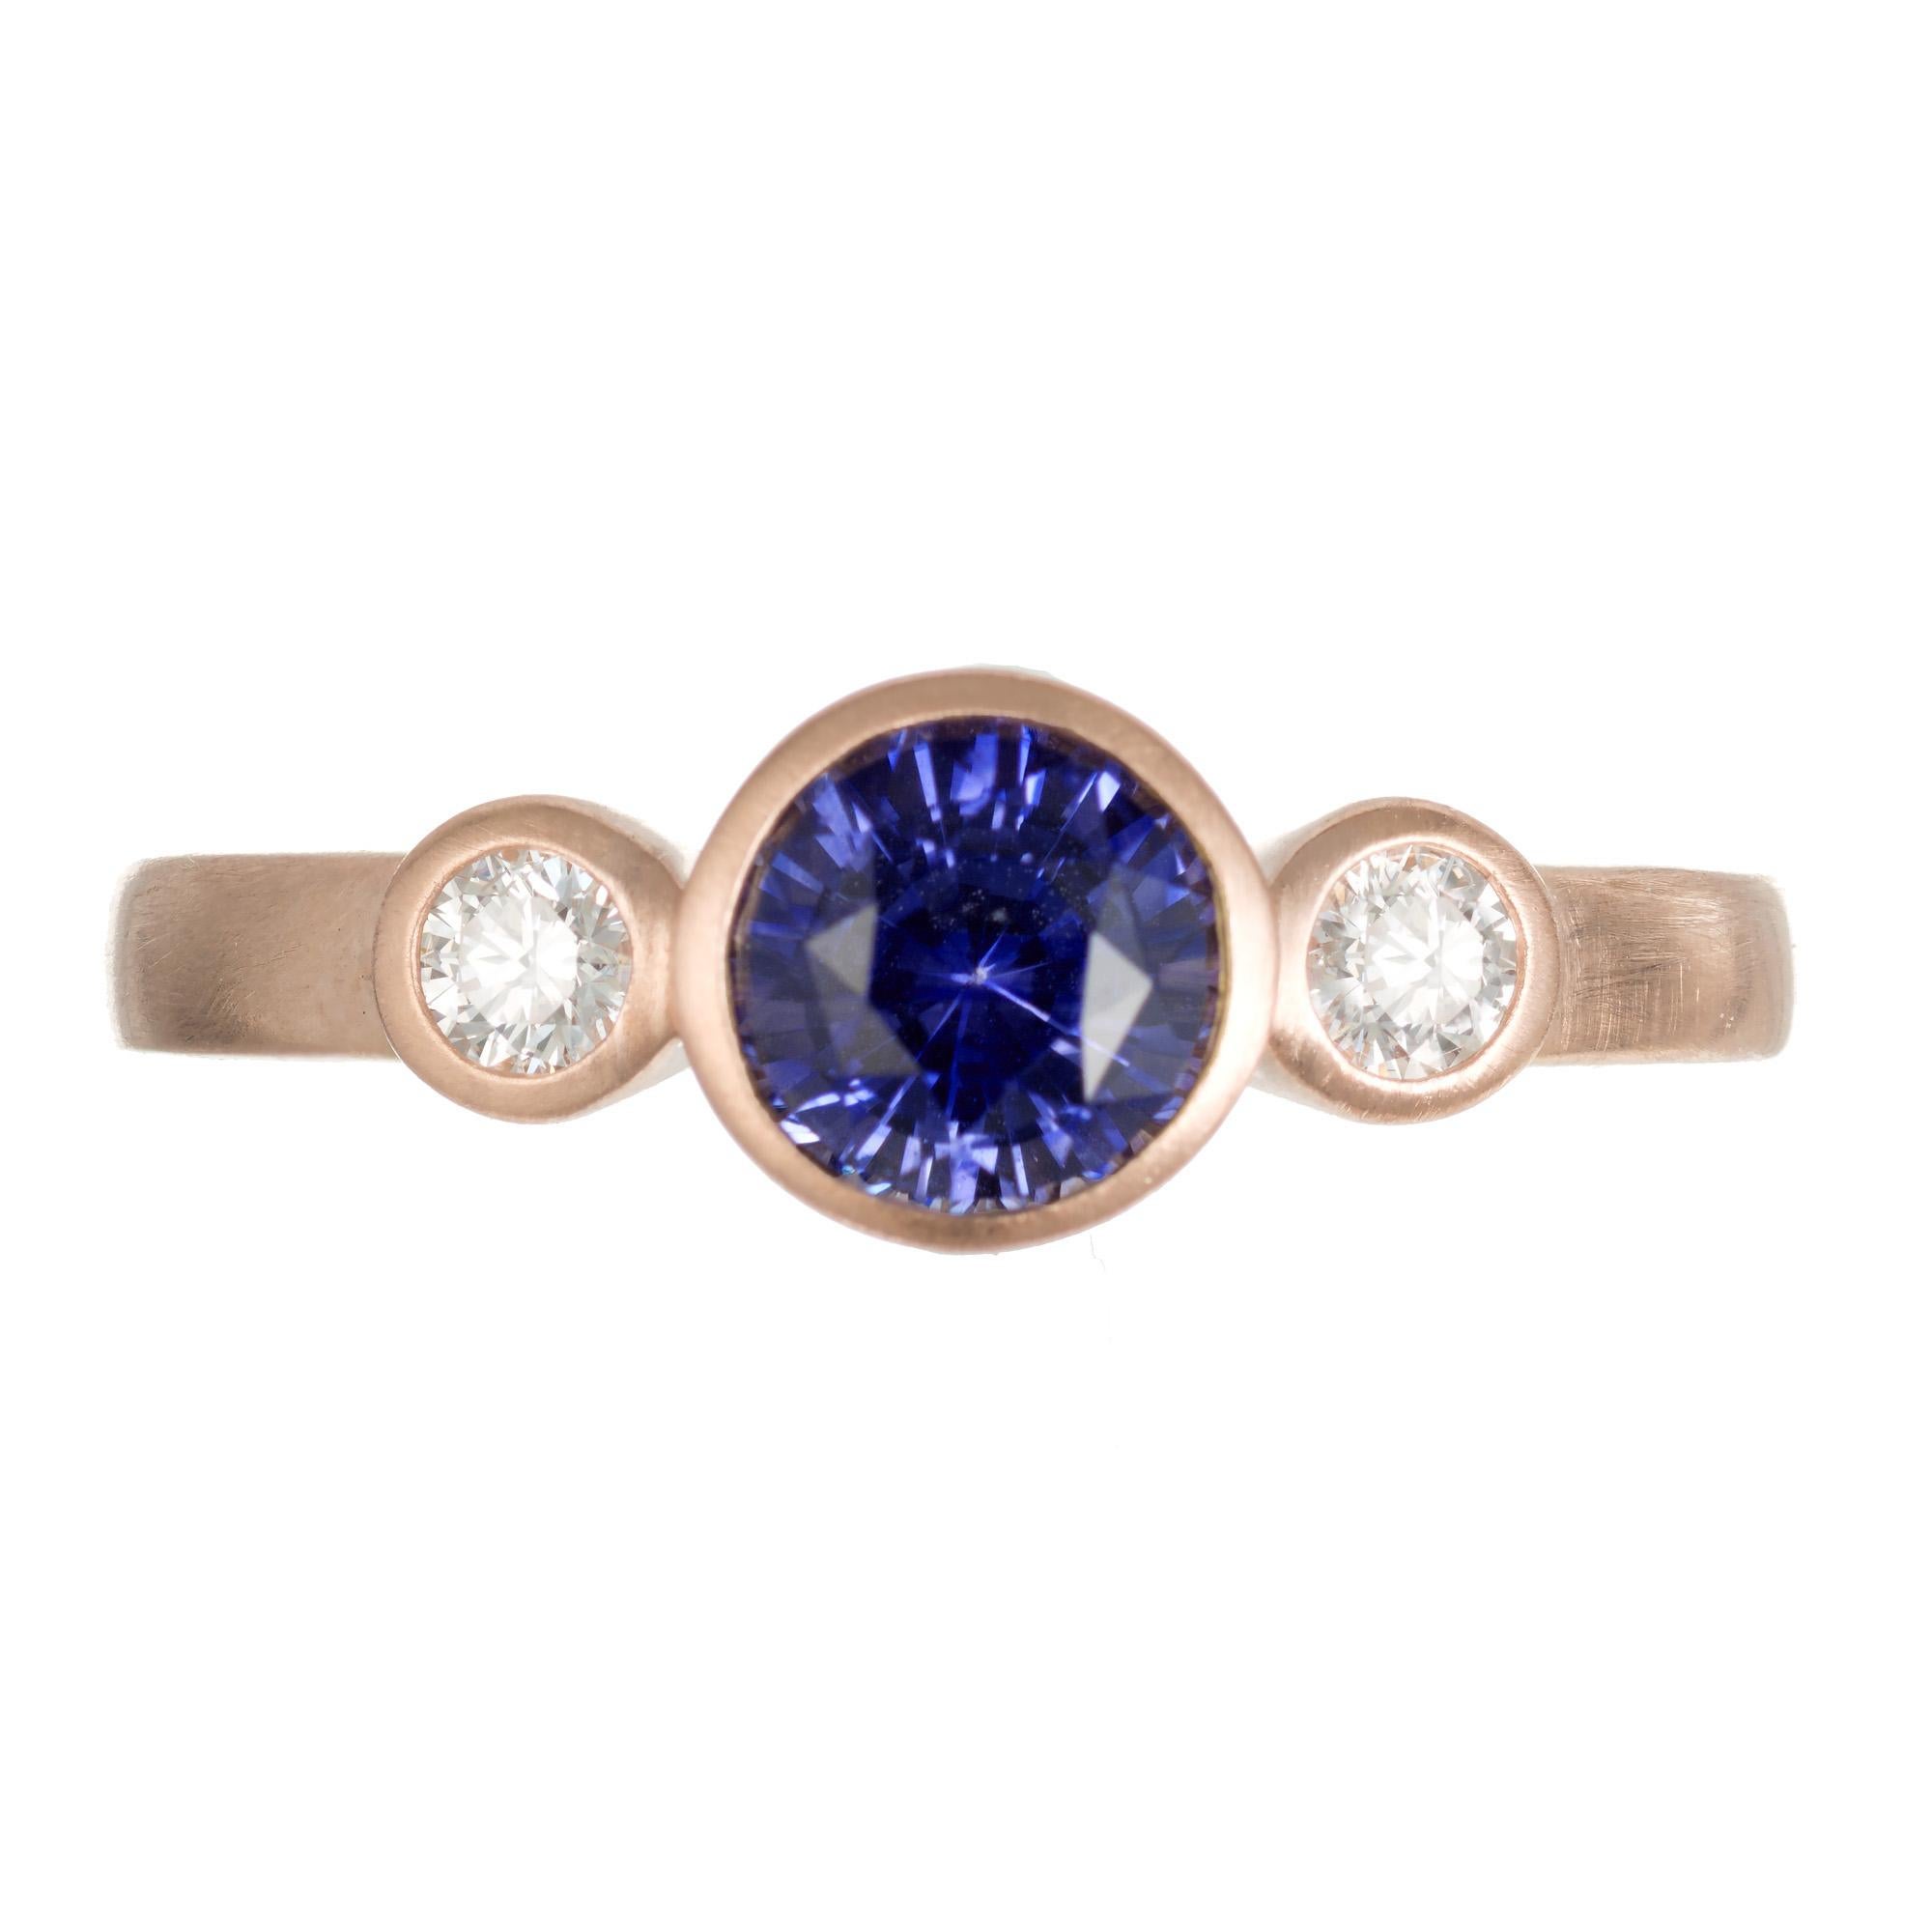 Sri Lanka, Ceylon sapphire and diamond engagement ring. This ring begins with a .96ct round center sapphire which is mounted in a 14k rose gold bezel setting. The rich blue and violet sapphire is accented buy one round brilliant cut diamond on each